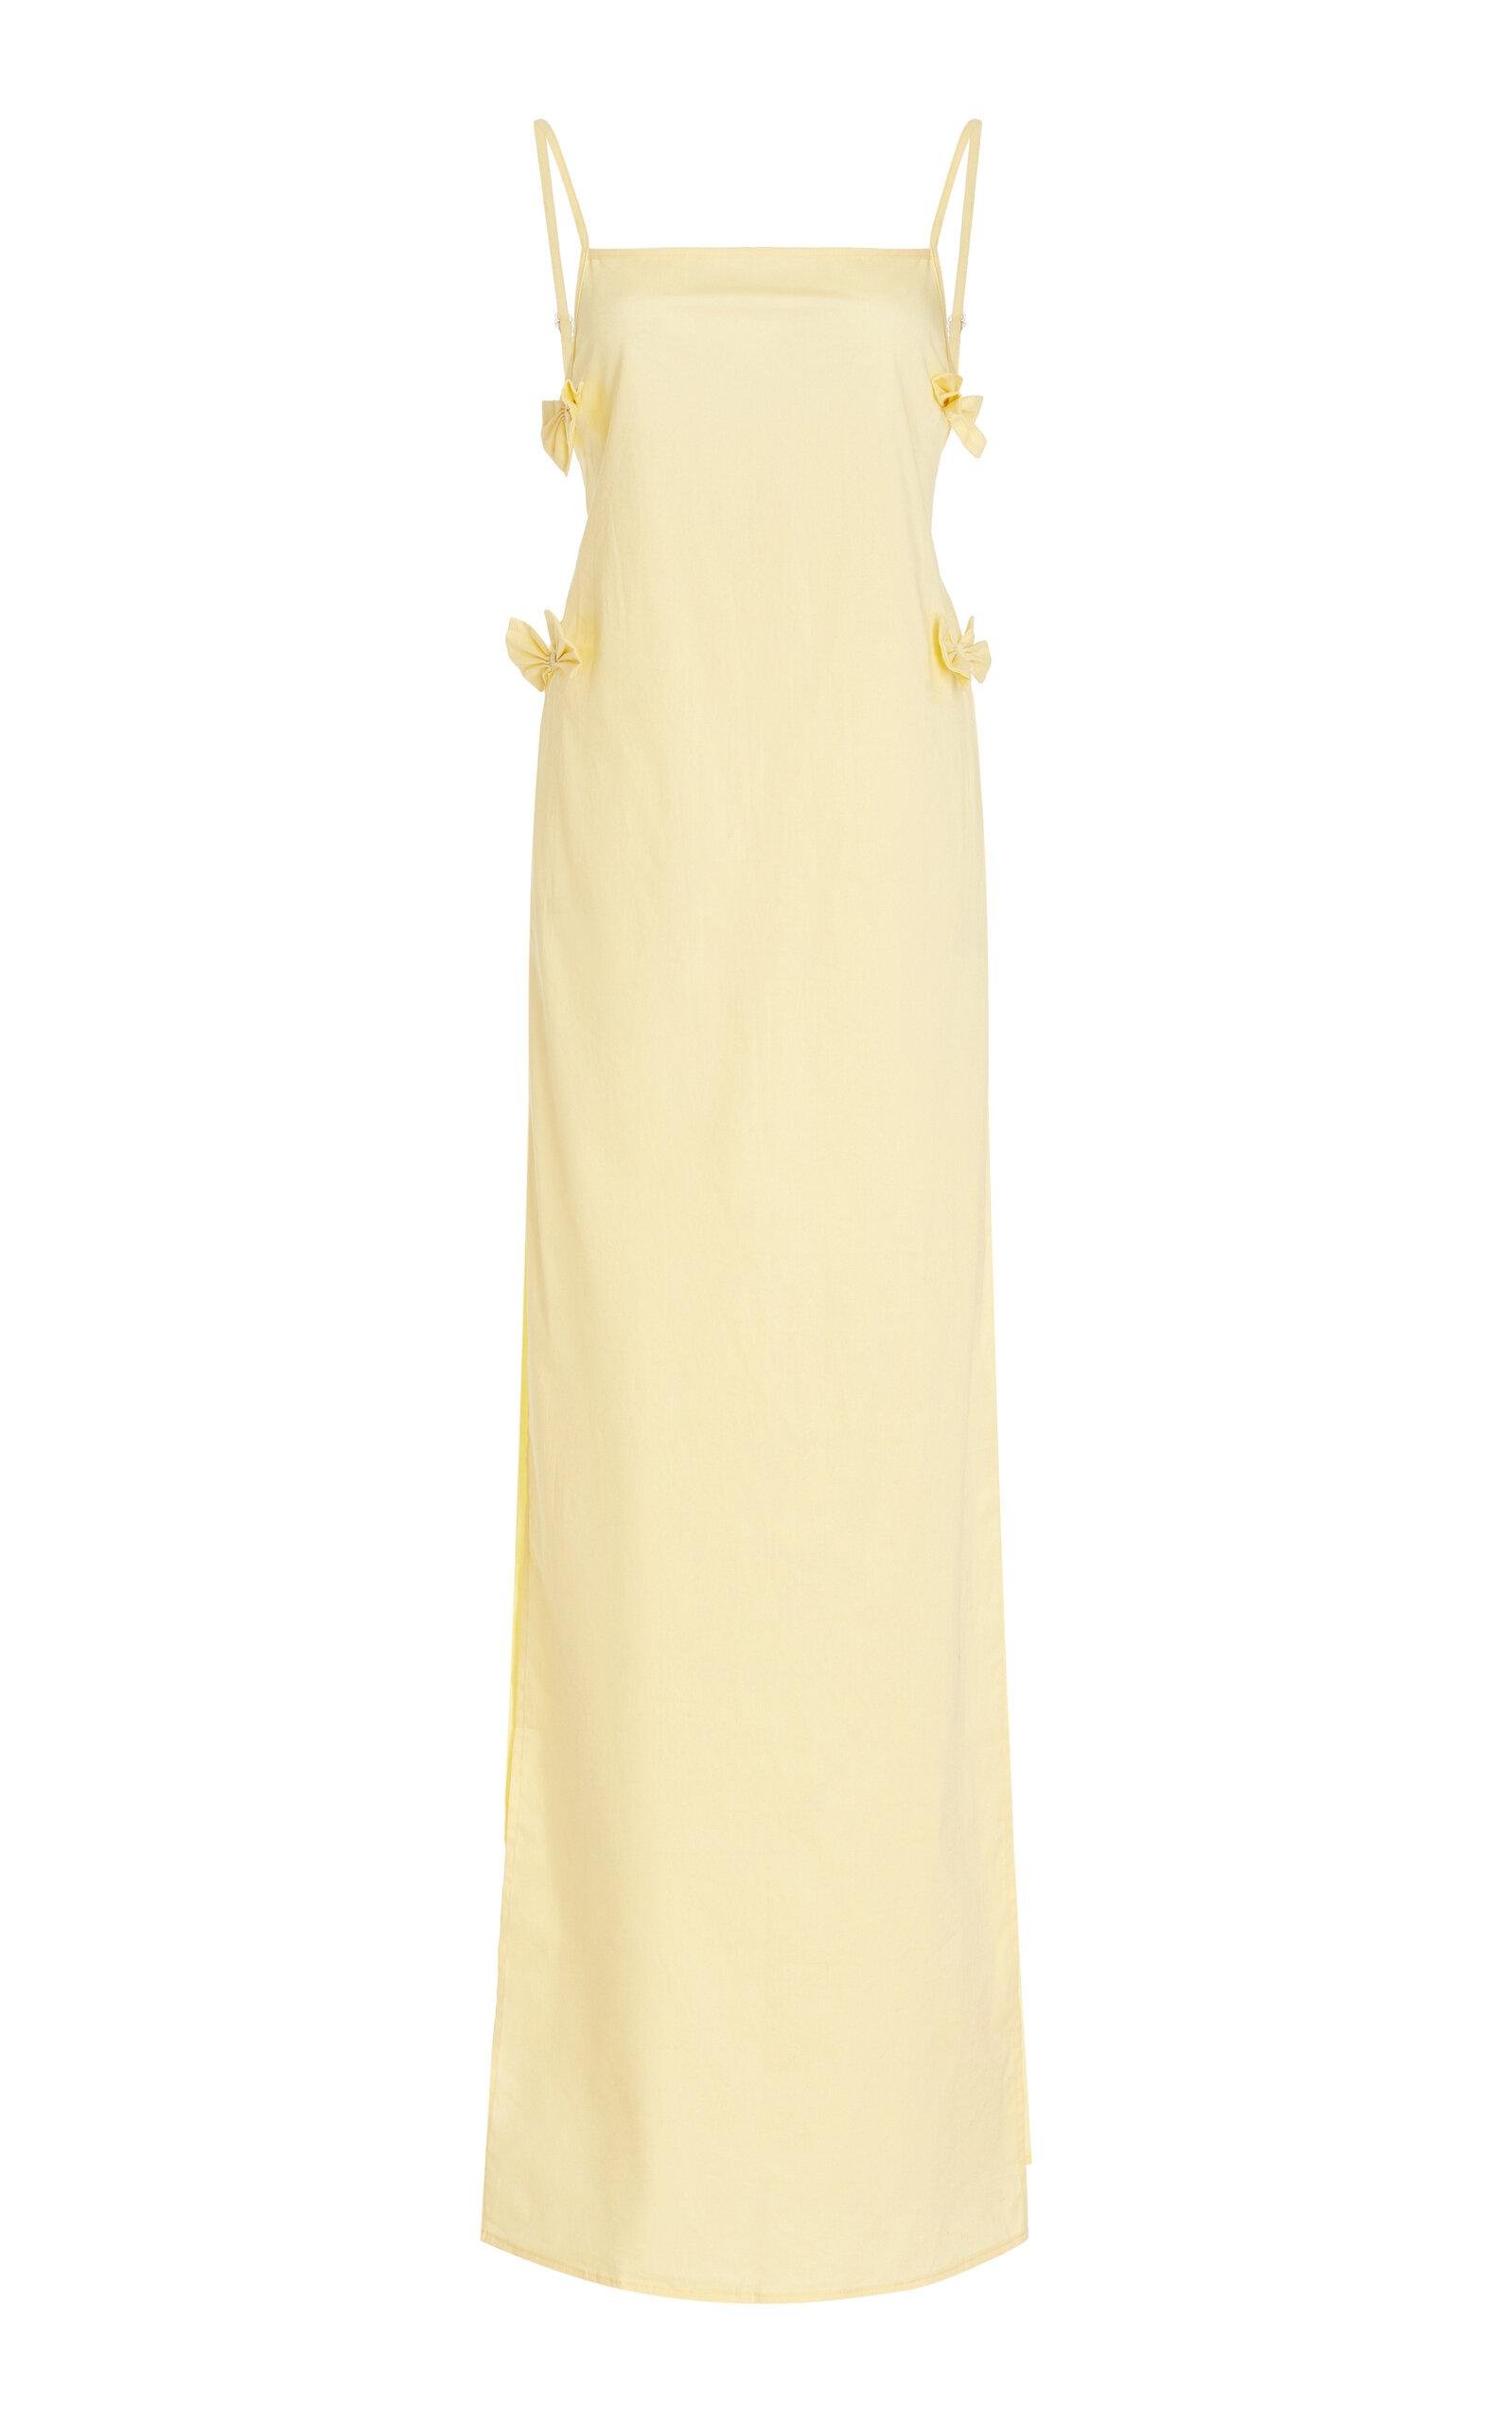 House of Aama - Exclusive Bow-Detailed Cotton-Blend Maxi Dress - Yellow - US 10 - Moda Operandi by HOUSE OF AAMA